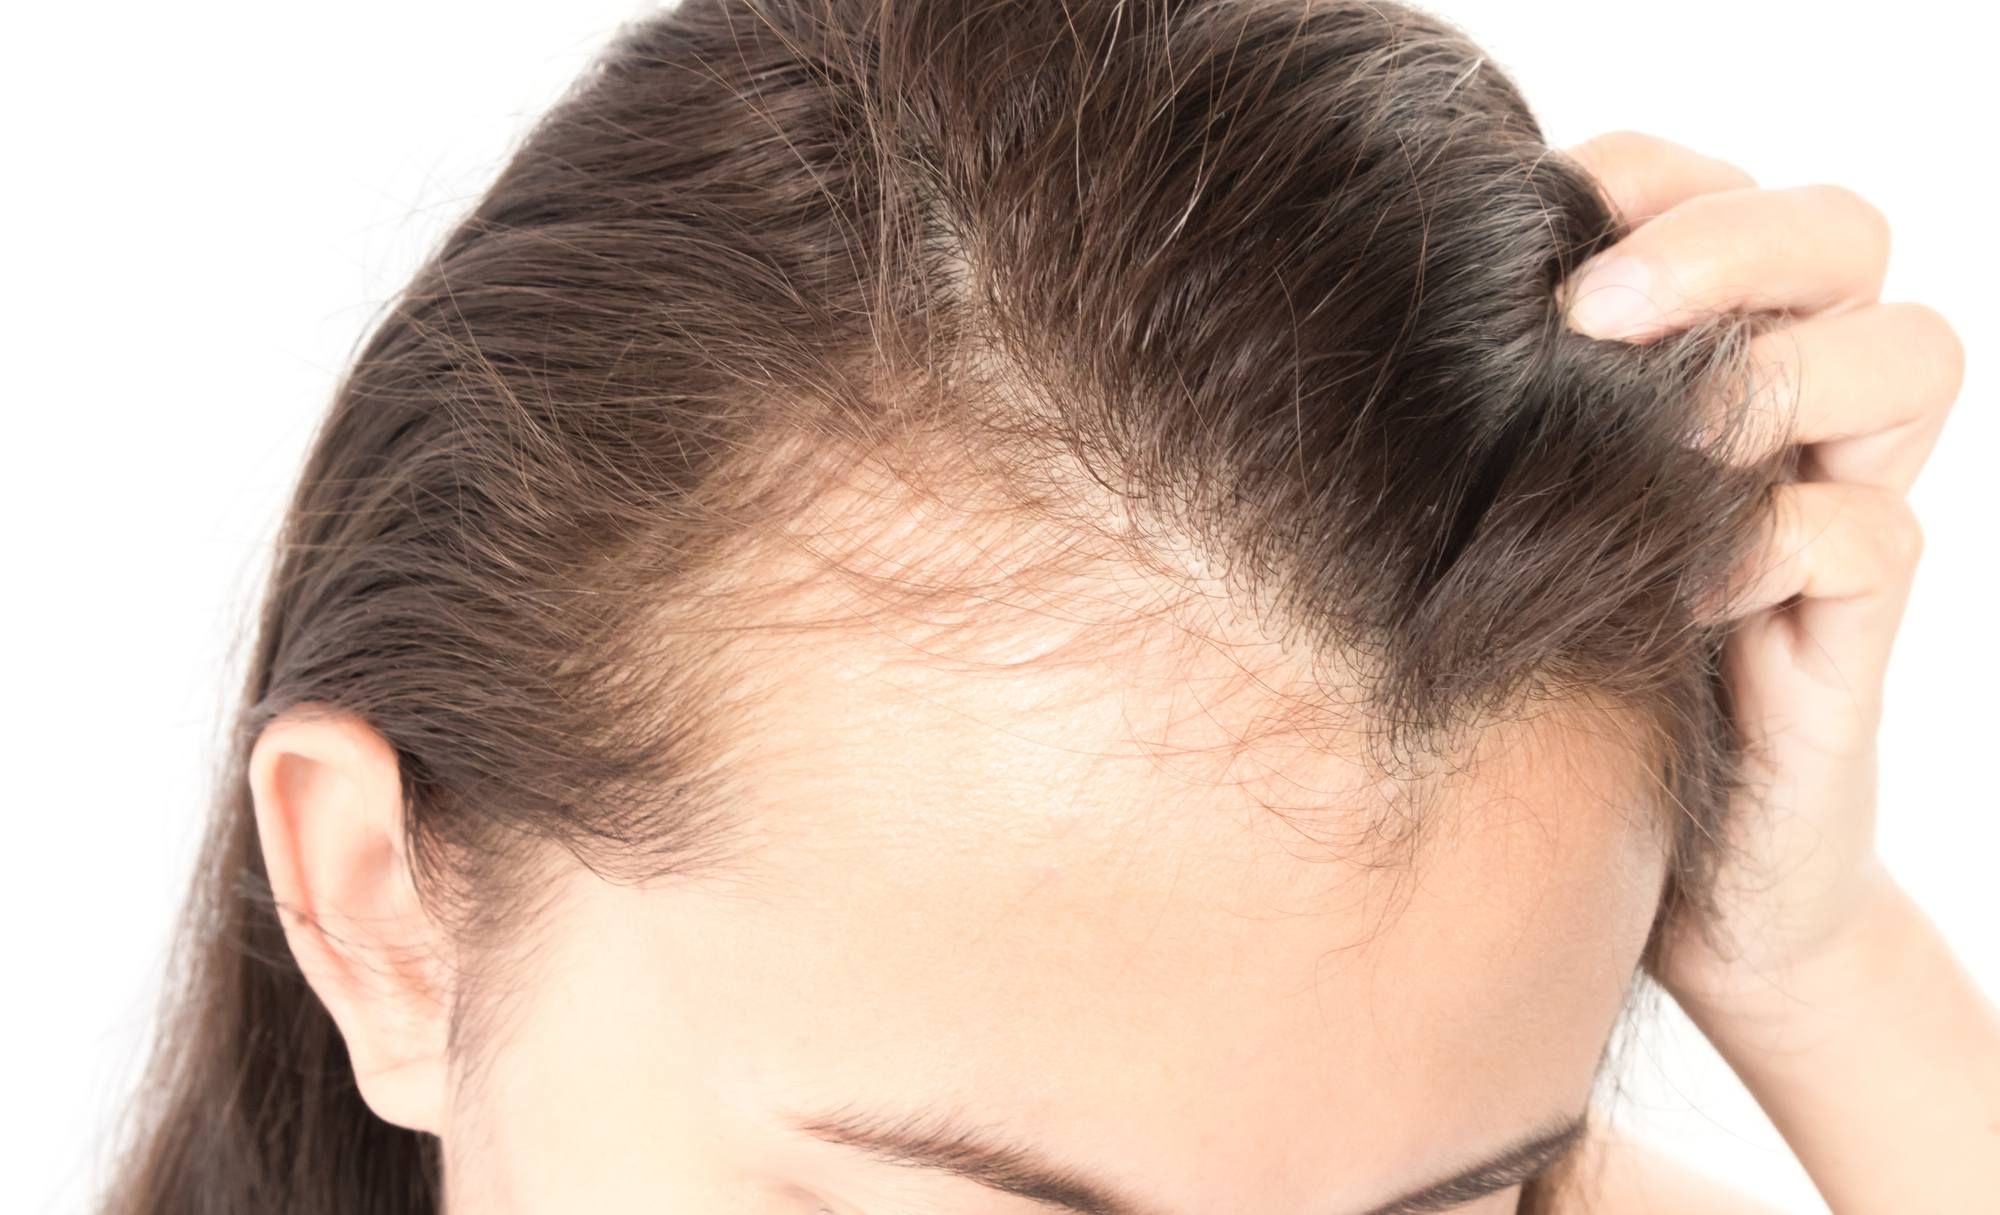 Walgreens sold a female hair loss product for more, class action lawsuit claims.